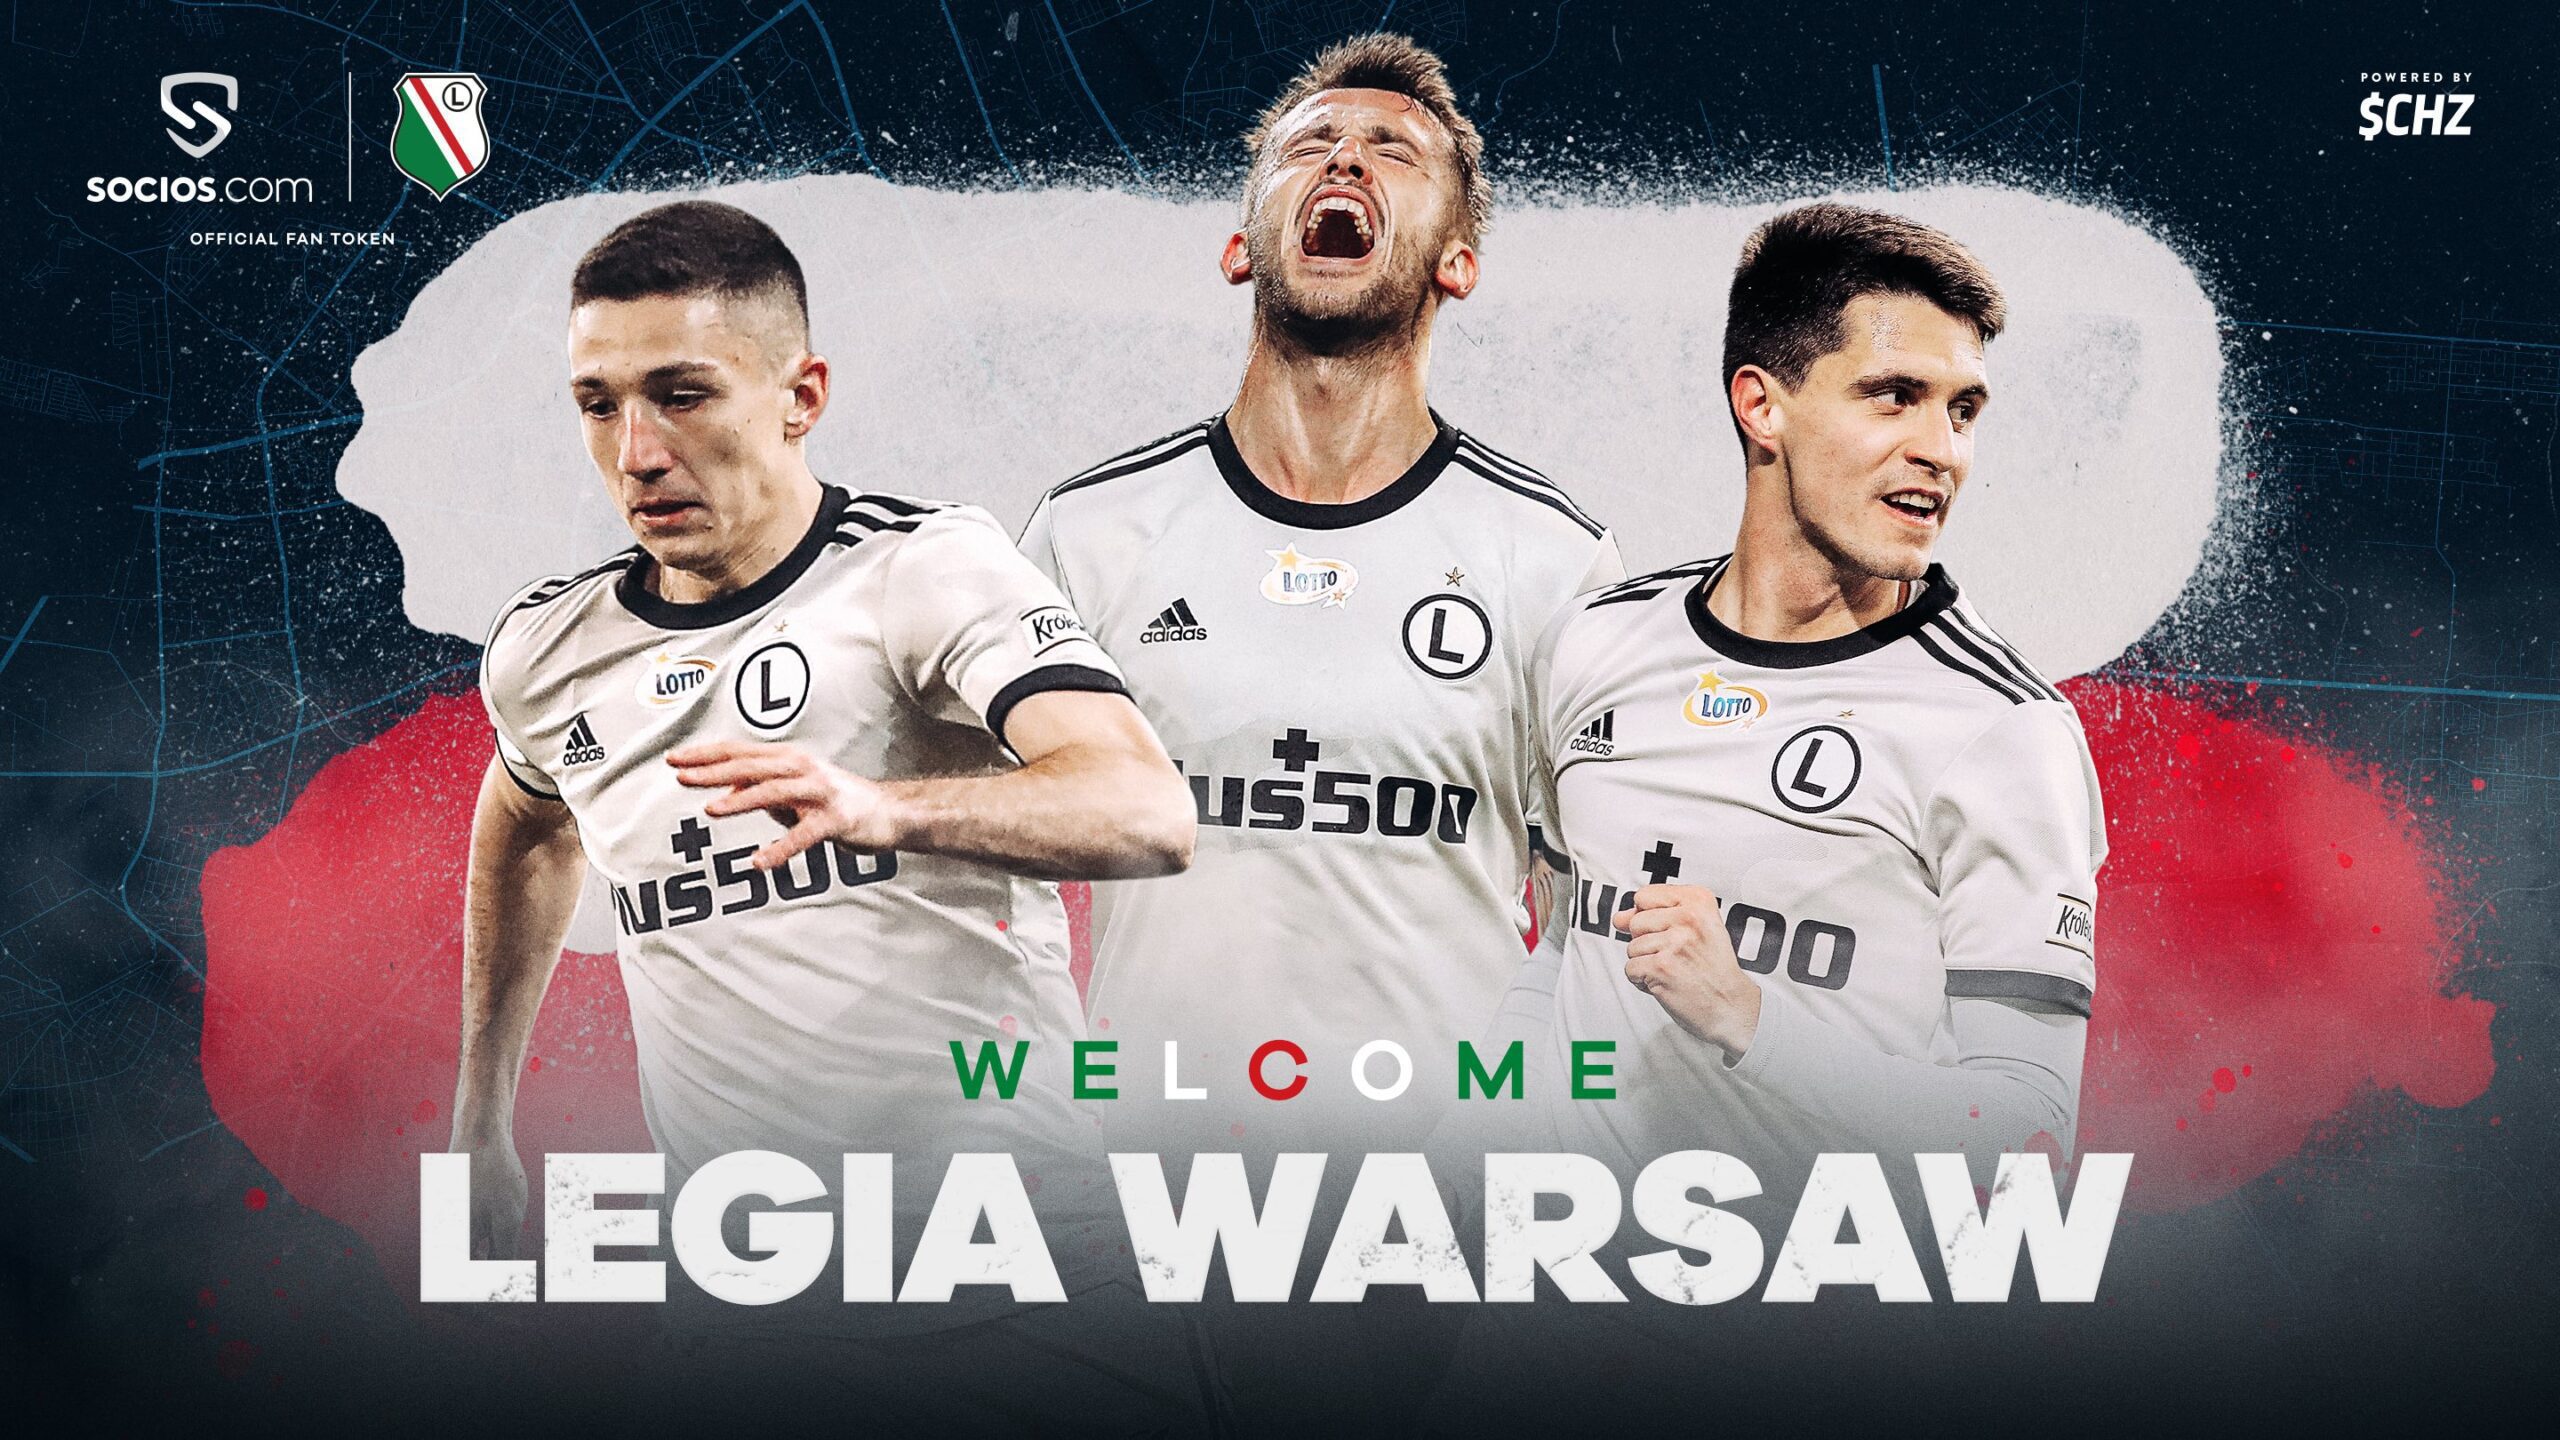 Legia Warsaw Will Become The First Polish Club To Launch A Fan Token On Socios.com